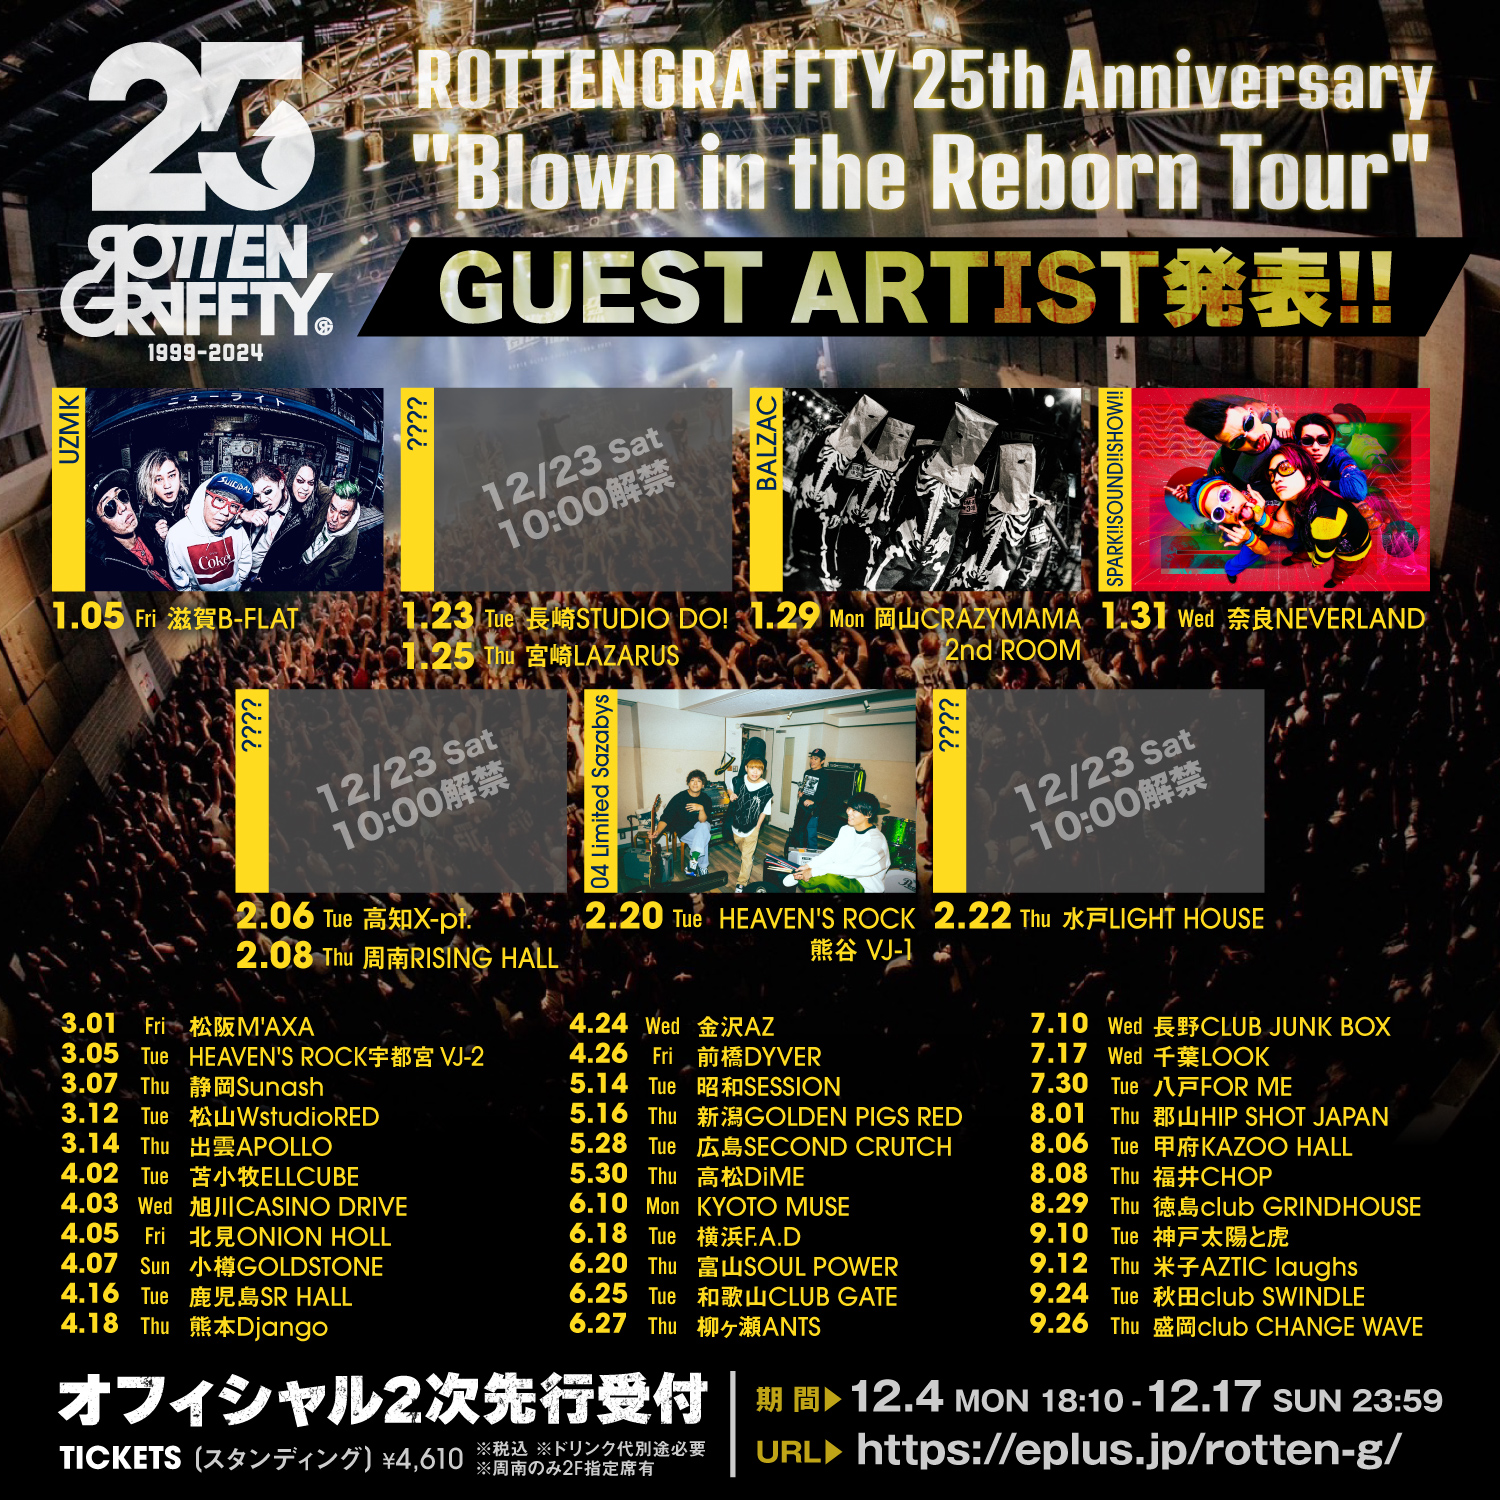 ROTTENGRAFFTY 25th Anniversary "Blown in the Reborn Tour" 出演決定！